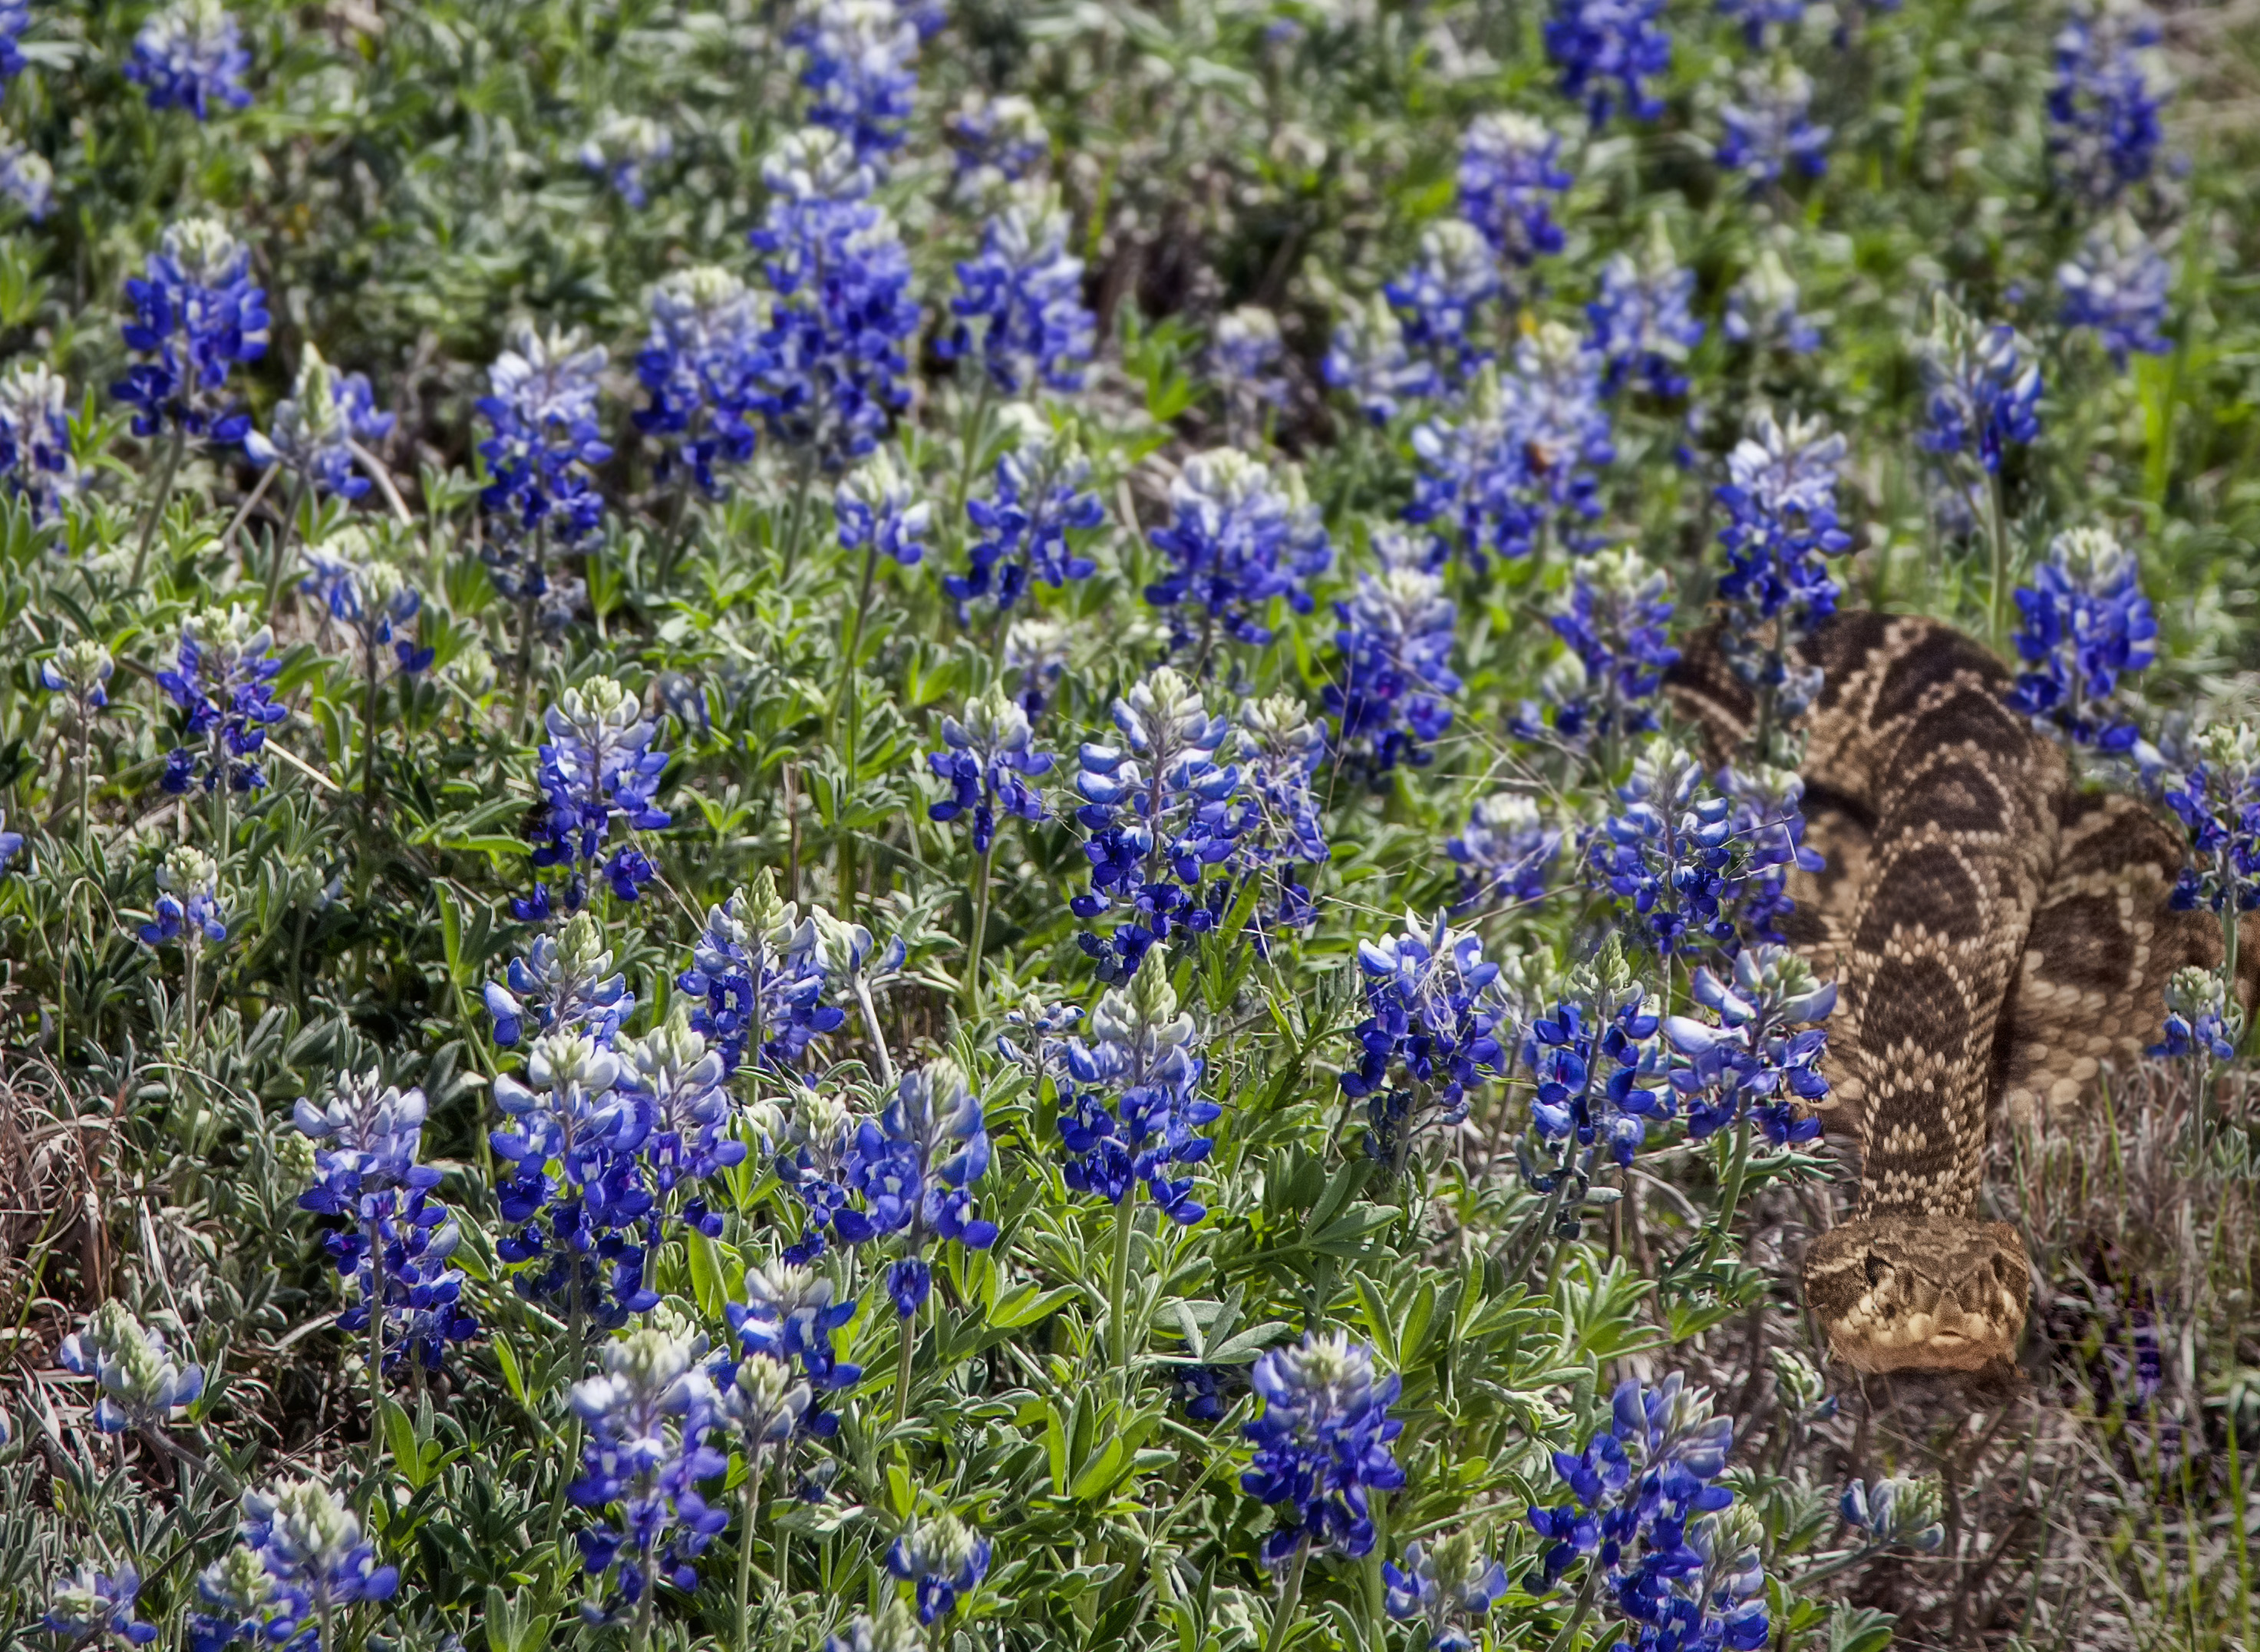 Going to Take Pictures in Bluebonnets? 'Use Caution,' Warn Experts